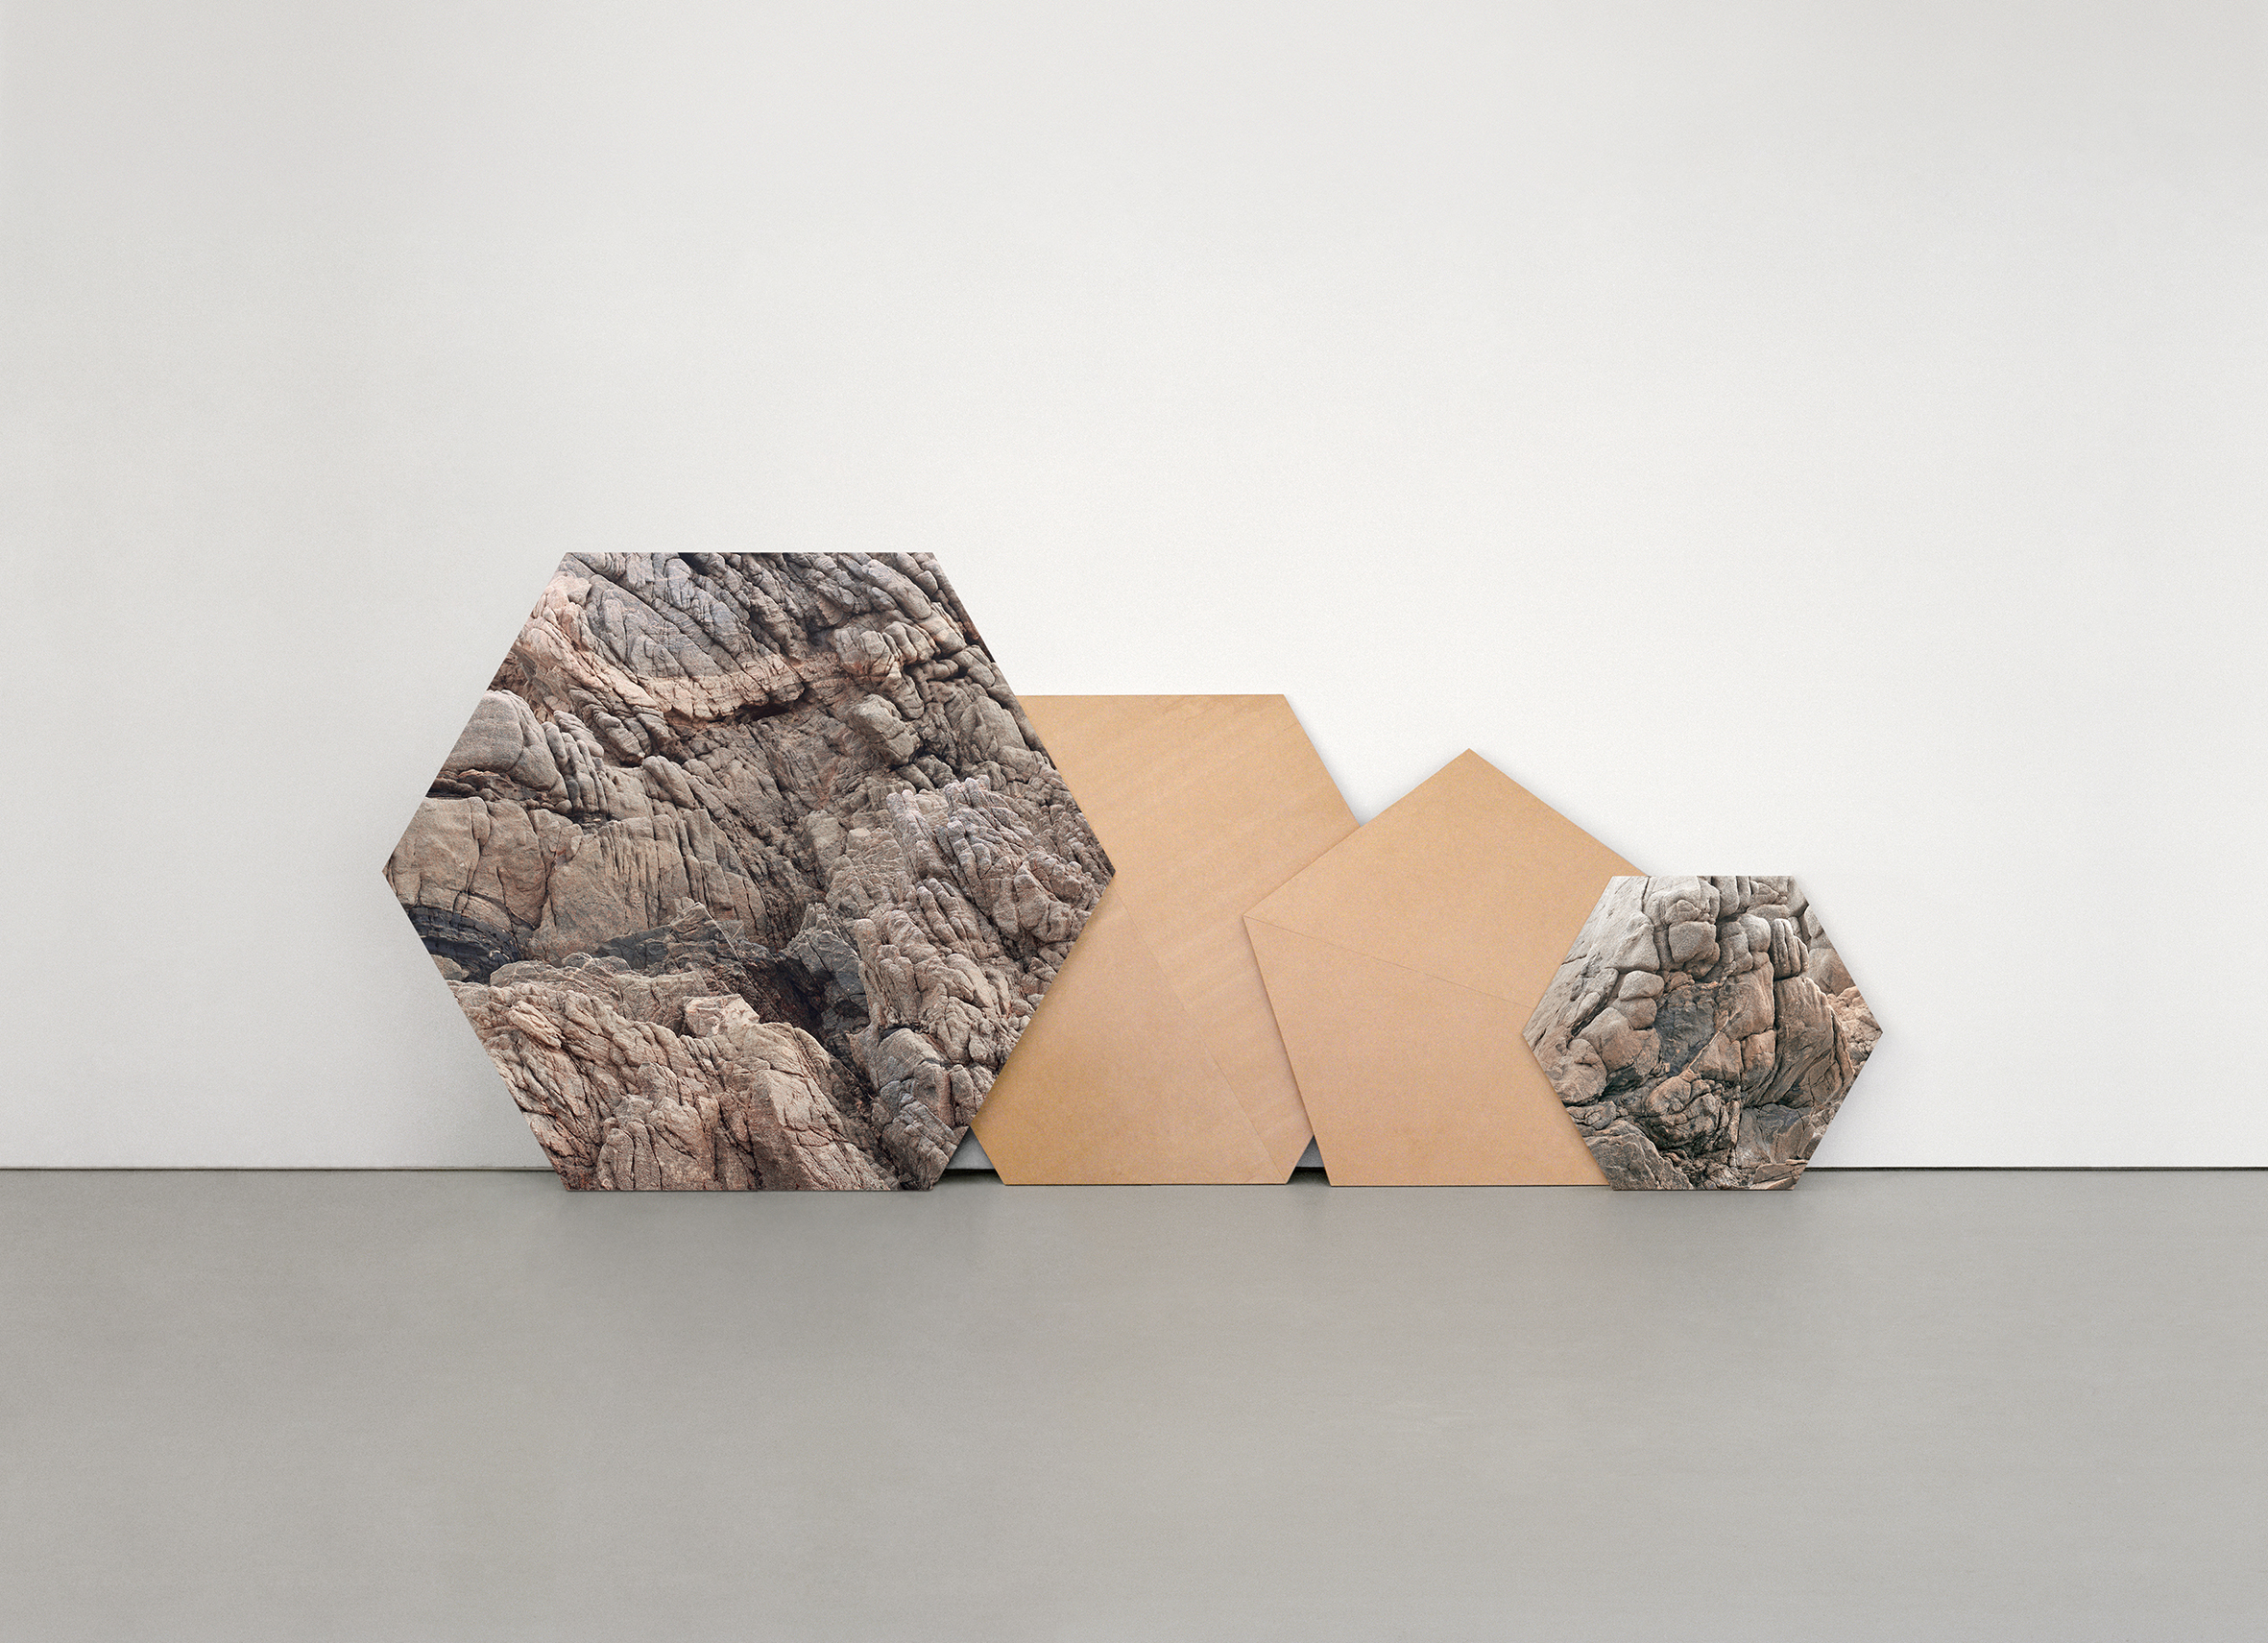   Andrea Galvani © 2005/2015,   Deconstruction of a Mountain #0,   Installation detail at Curro y Poncho, Gudalajara, Mexico.   Infinitely reconfigurable sculpture, Archival pigment print mounted on weather treated MDF, 13 architectural elements, dim